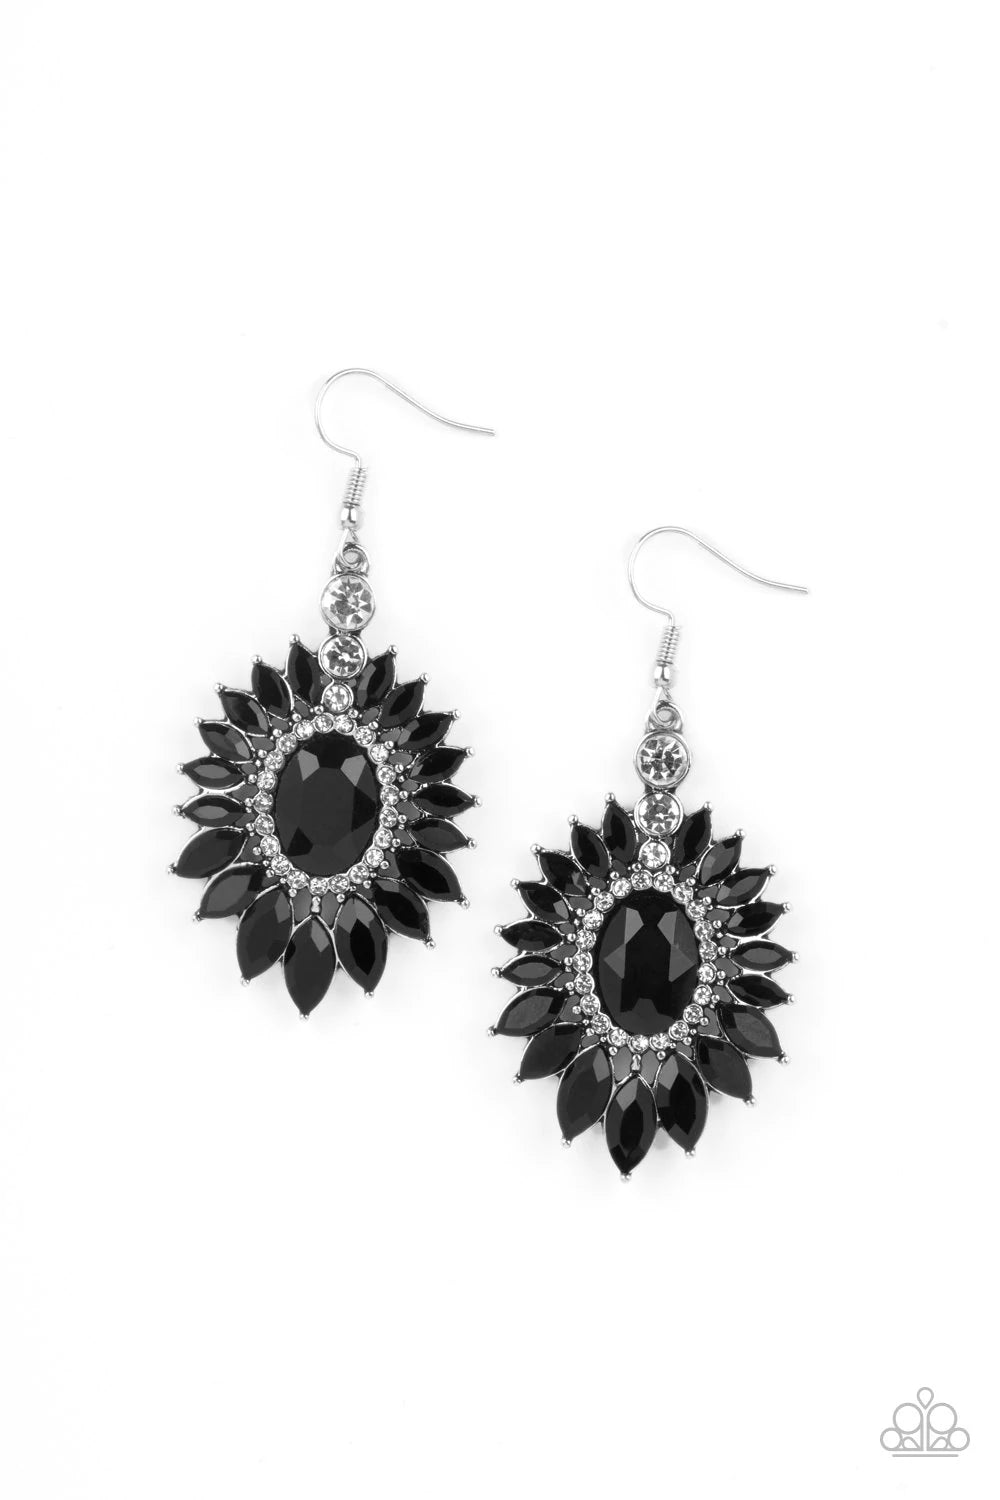 Paparazzi Accessories Big Time Twinkle - Black Glittery black marquise cut rhinestones fan out from a black oval gem center bordered in dainty white rhinestones, creating a sparkly floral frame. Earring attaches to a standard fishhook fitting. Jewelry